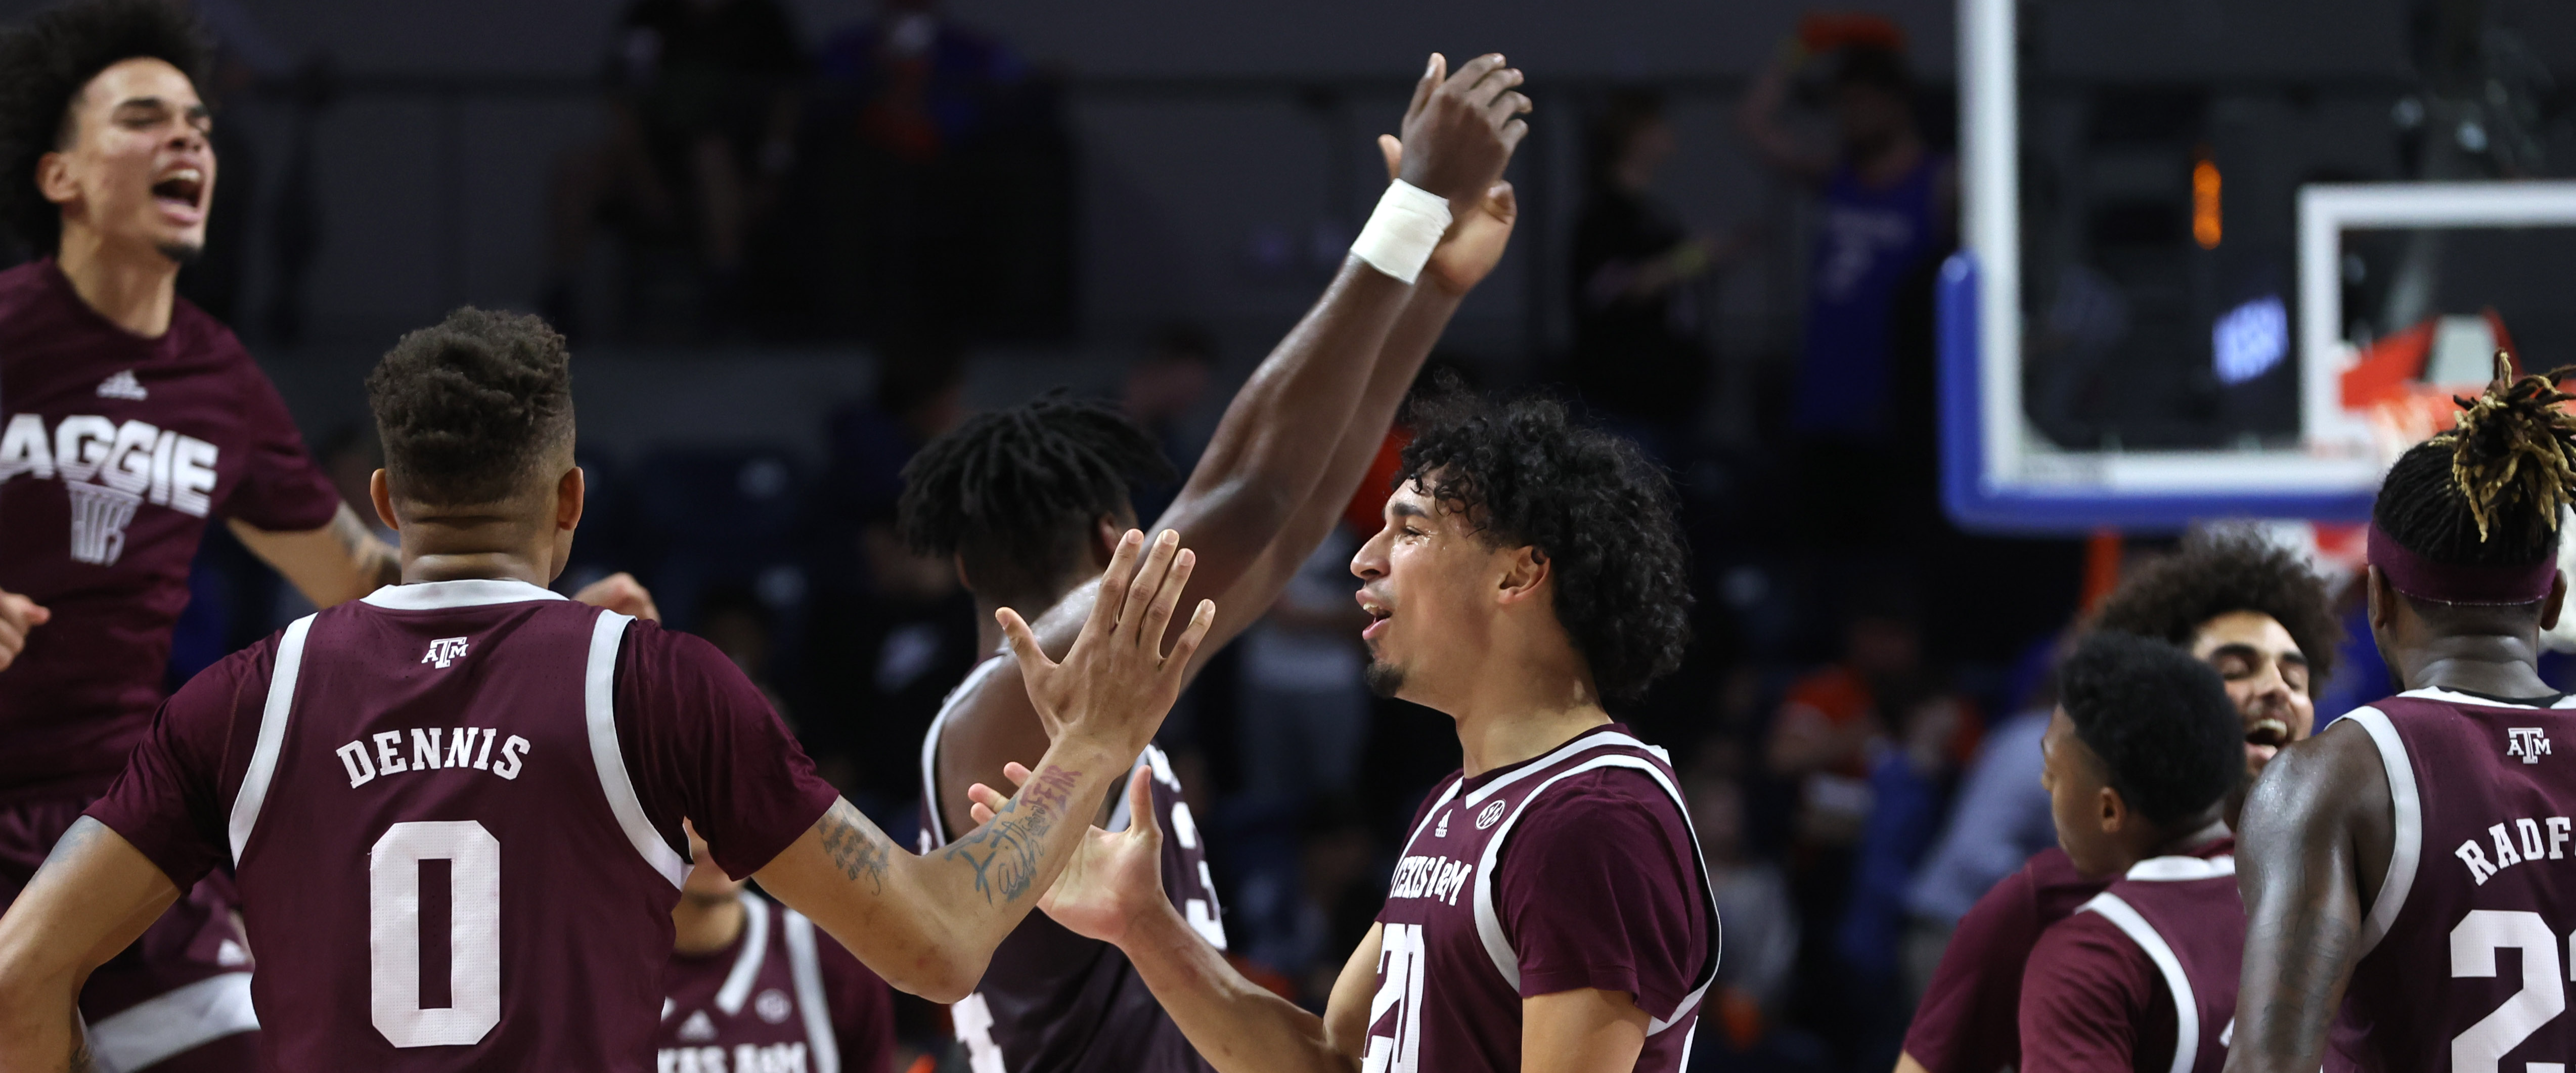 Texas A&M nearly lost to Florida because they forgot their jerseys!